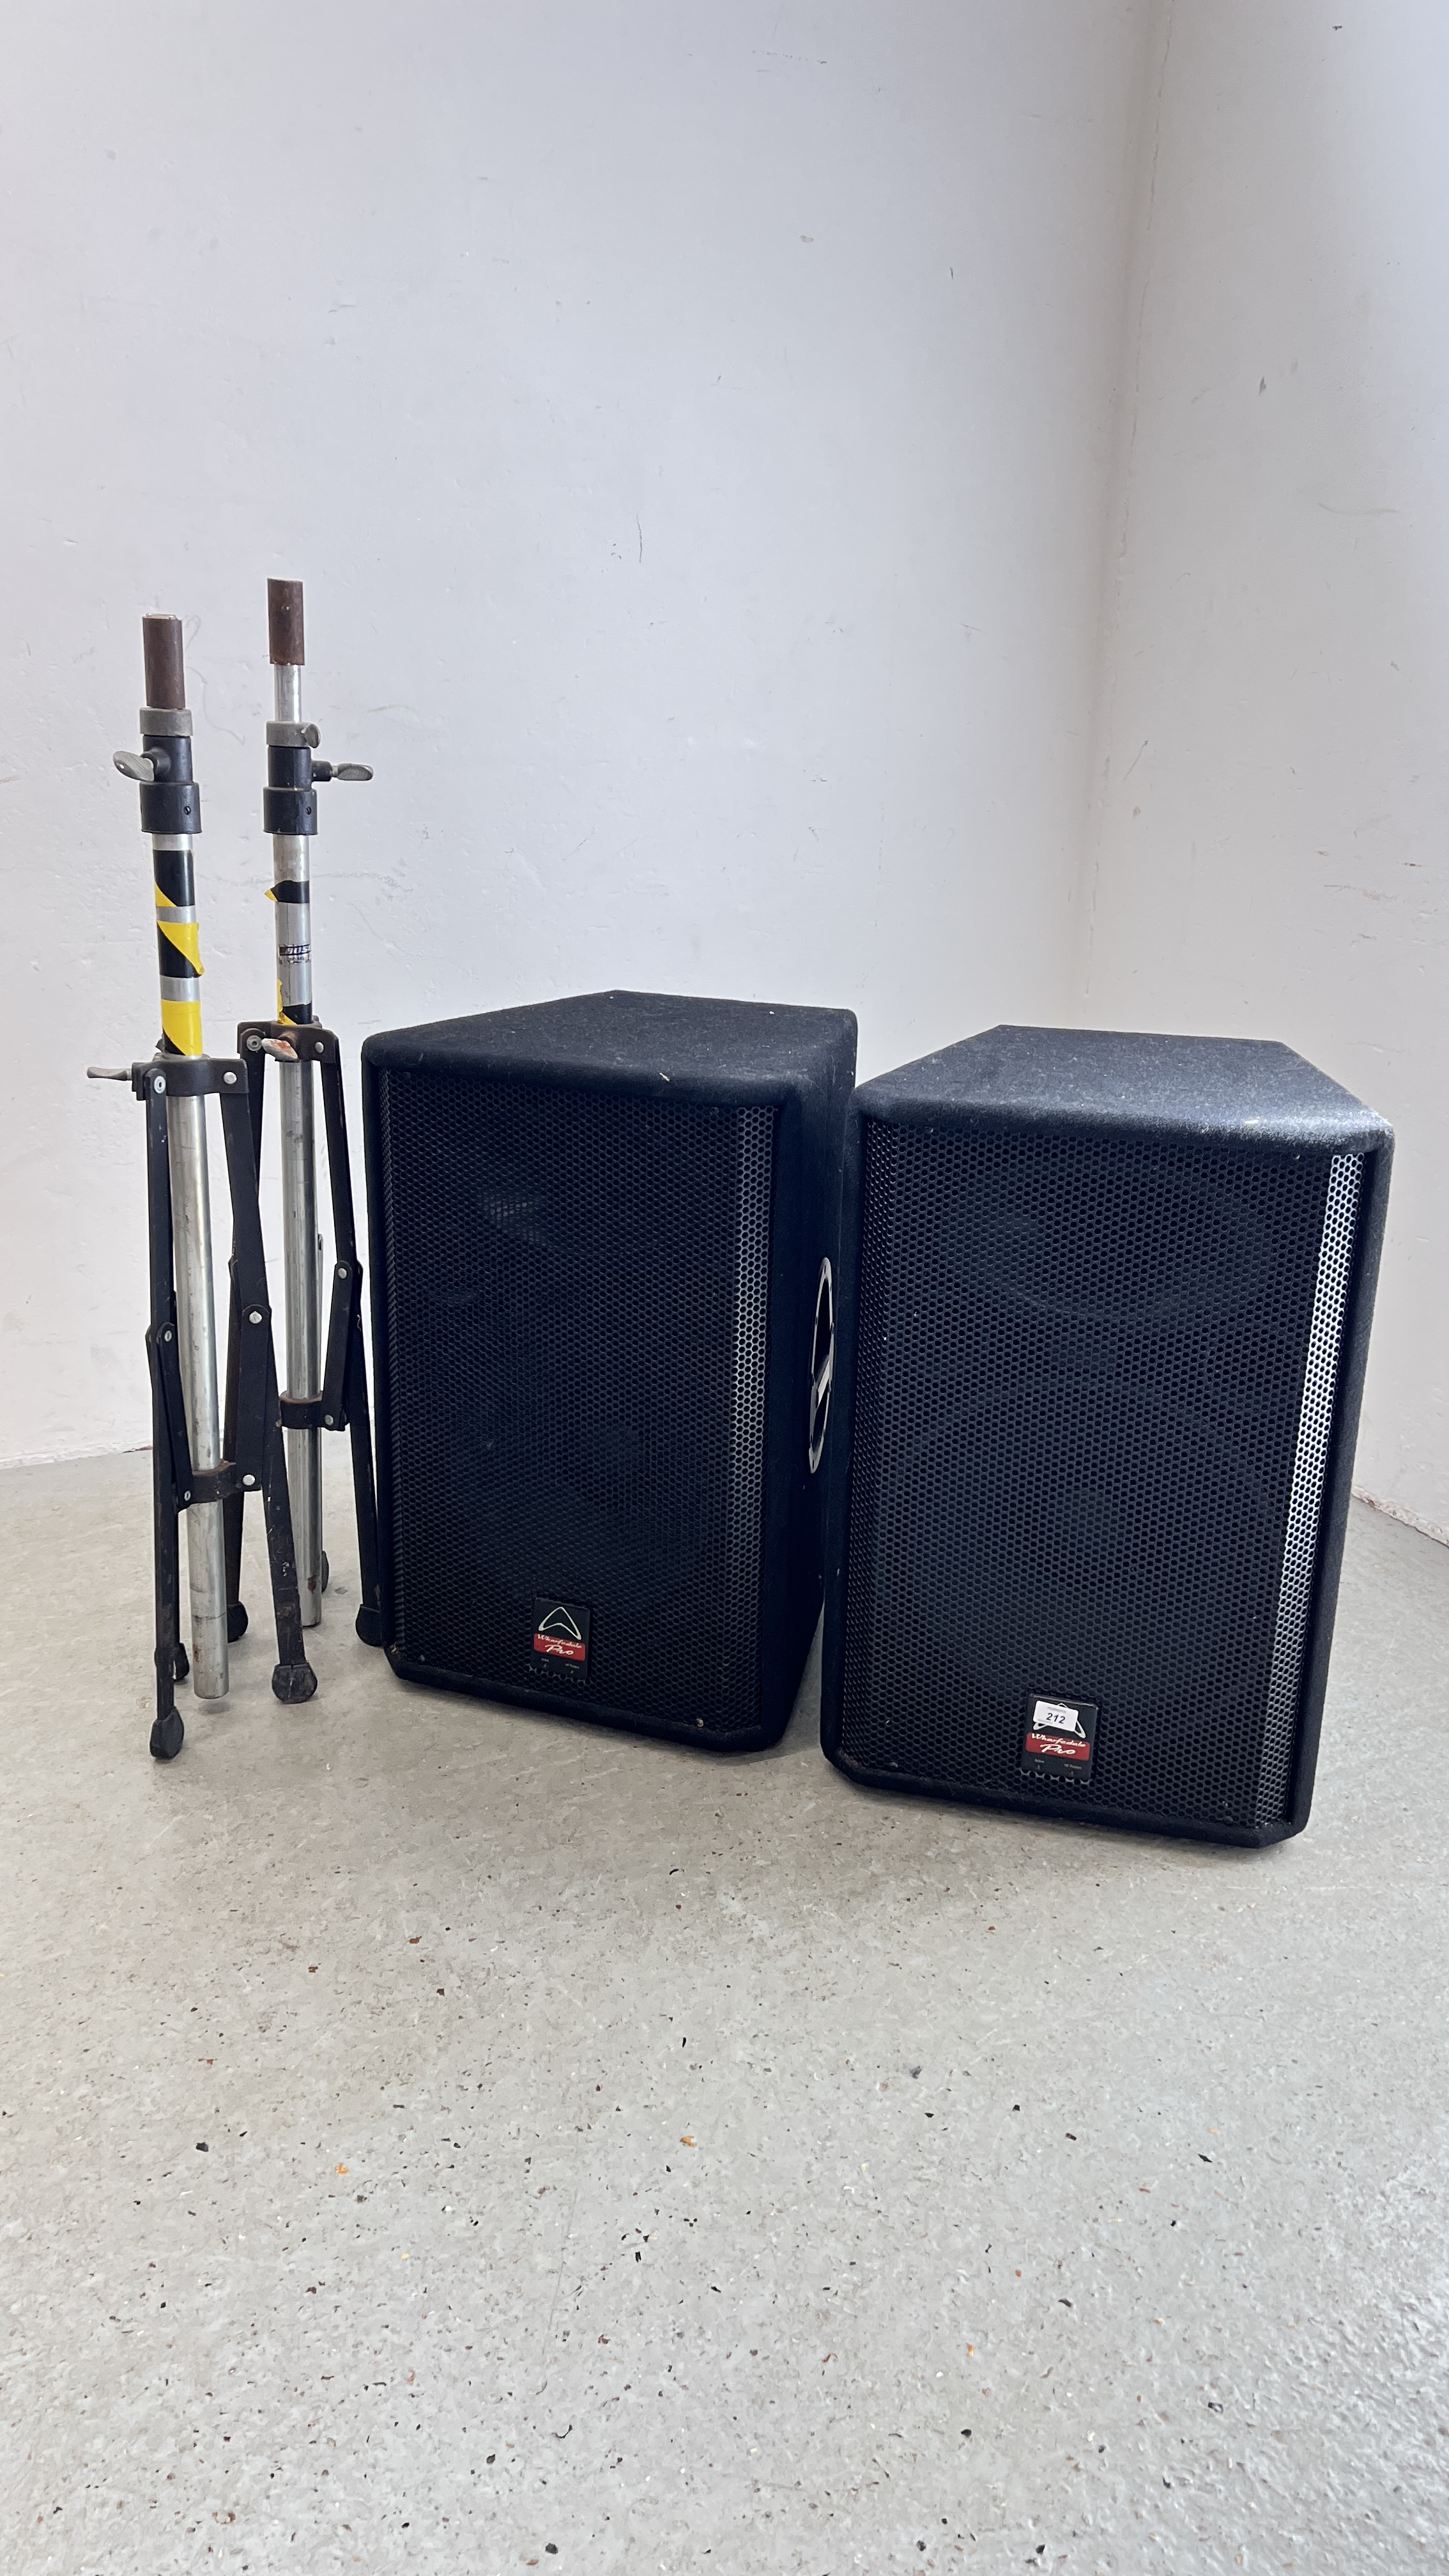 PAIR OF WHARFDALE PRO EVP-X15PA LOUD SPEAKERS PLUS PAIR OF FOLDING TRIPOD STANDS - SOLD AS SEEN -